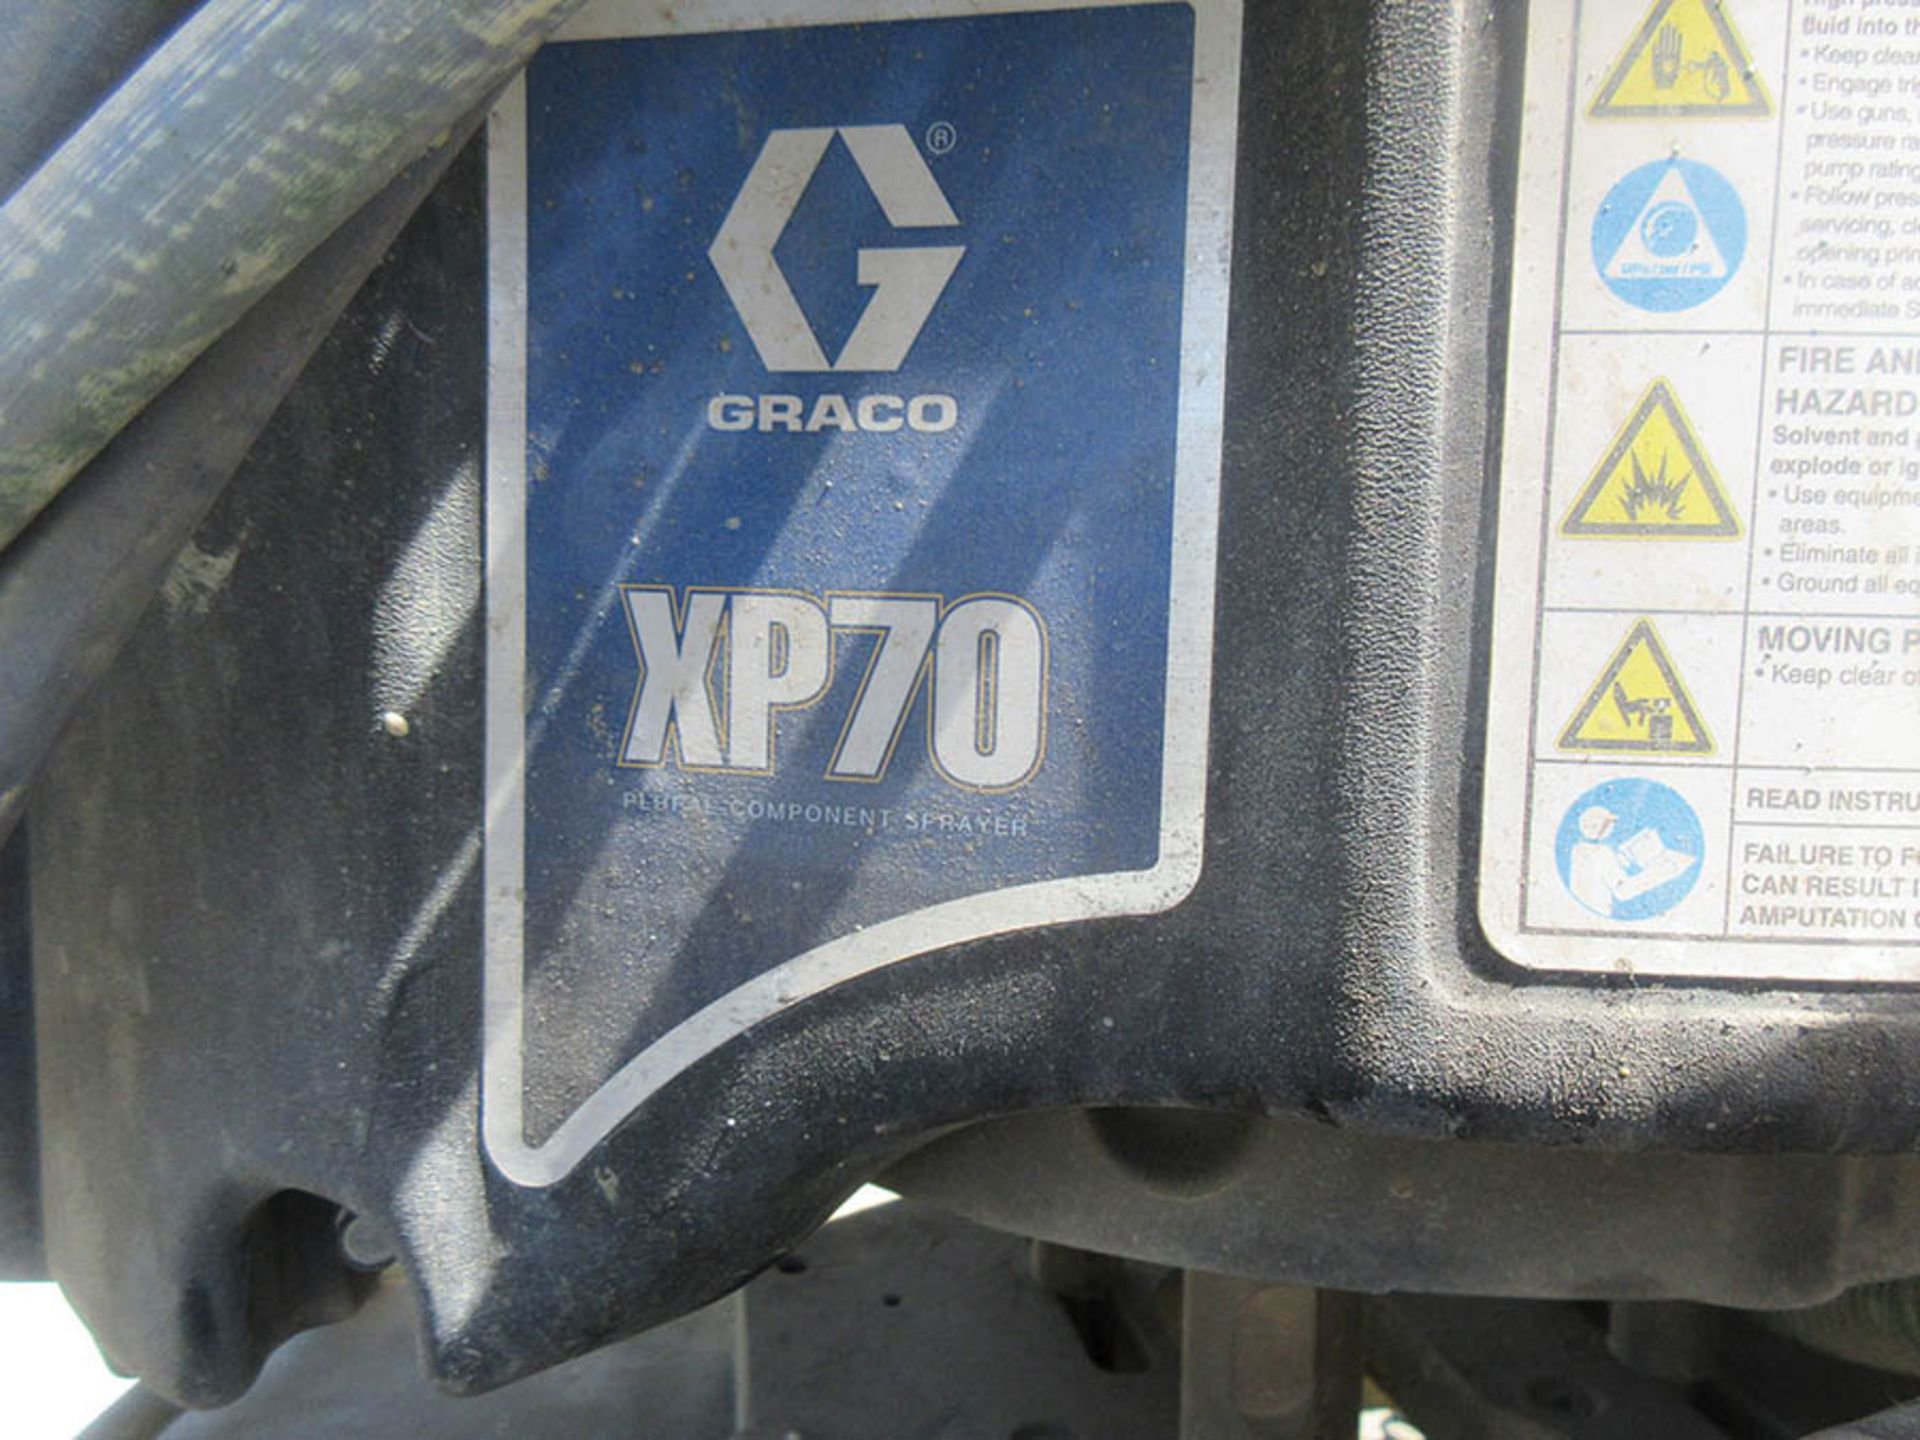 GRACO XP70 PLURAL COMPONENT SPRAYER, (LOCATION: 3220 ERIE PRWY ERIE, CO 80516) - Image 4 of 4